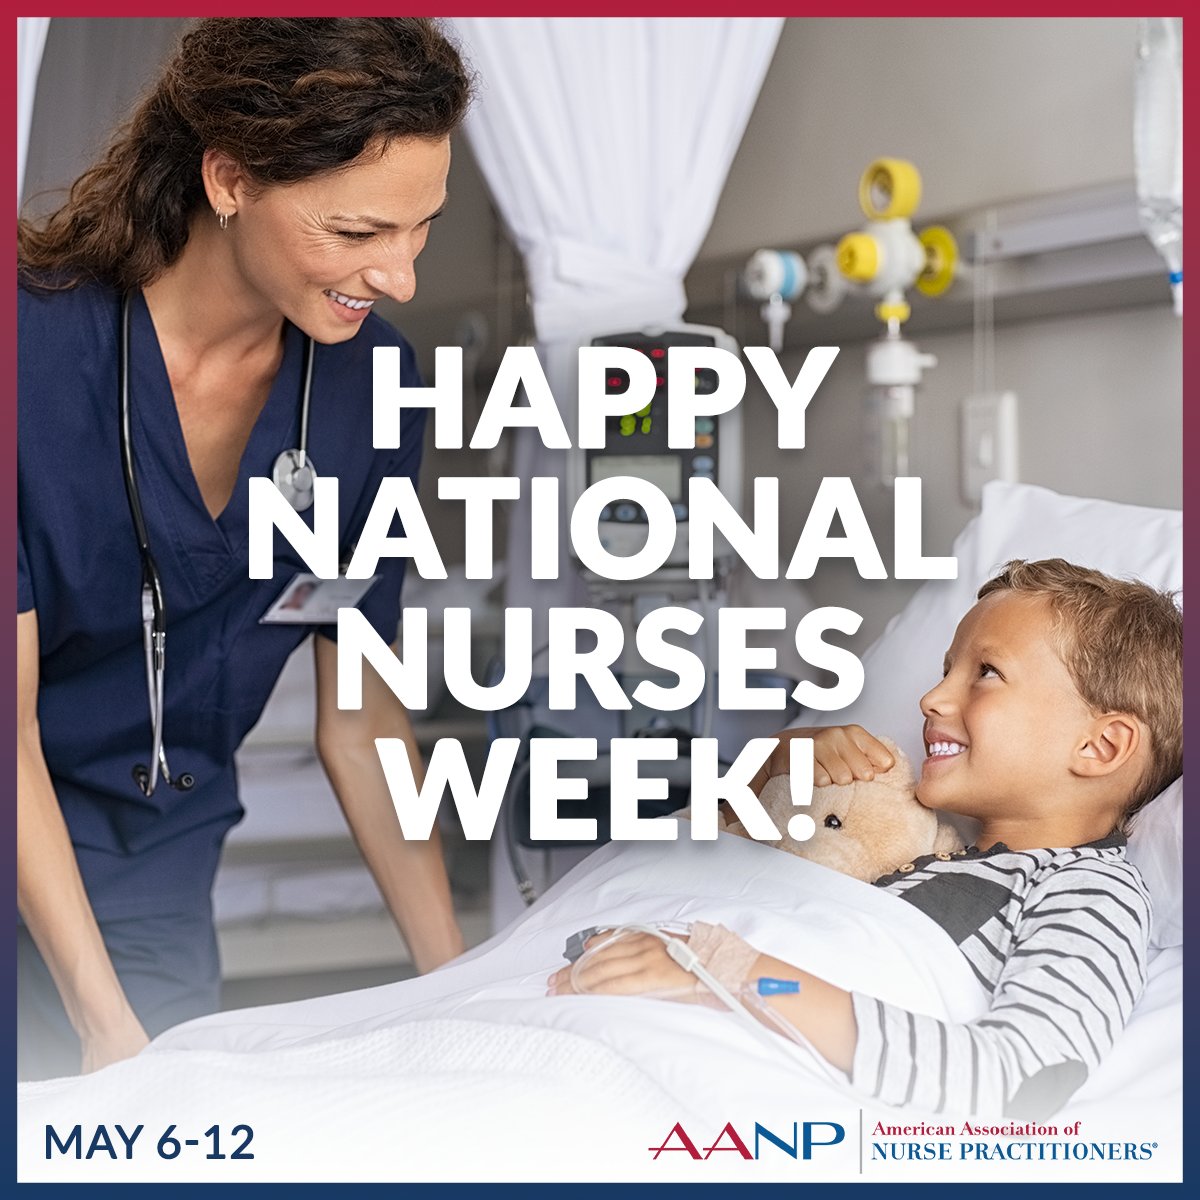 AANP wishes all nurses across the country a very happy National Nurses Week! Your commitment to high-quality patient care is the reason nursing has been voted the most trusted profession for 22 consecutive years. #NursesWeek